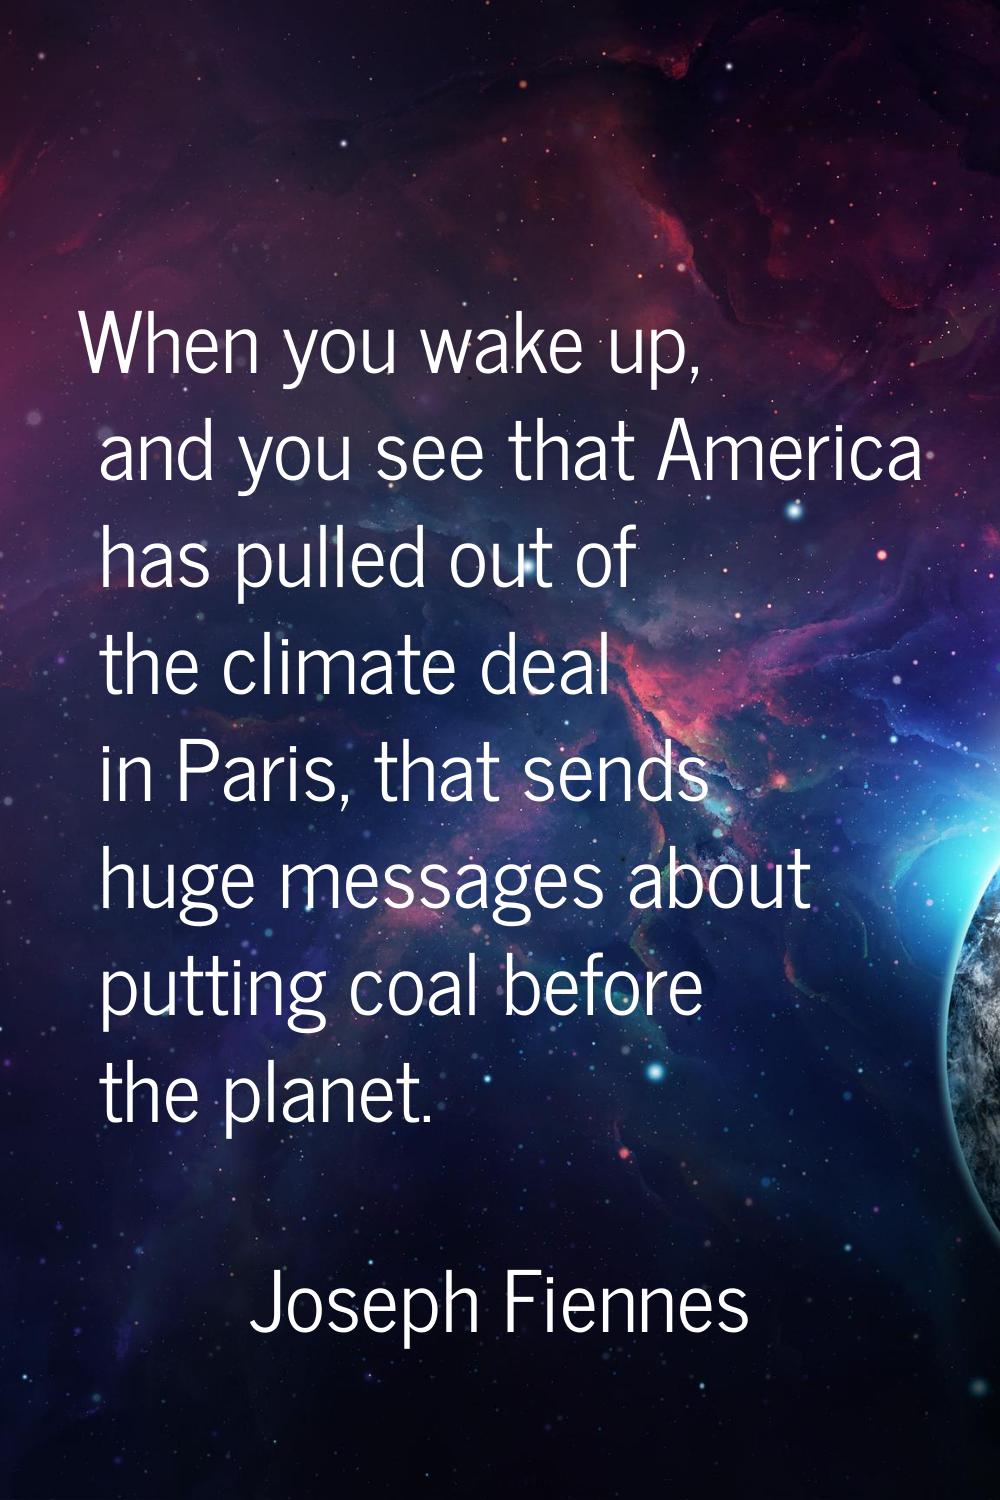 When you wake up, and you see that America has pulled out of the climate deal in Paris, that sends 